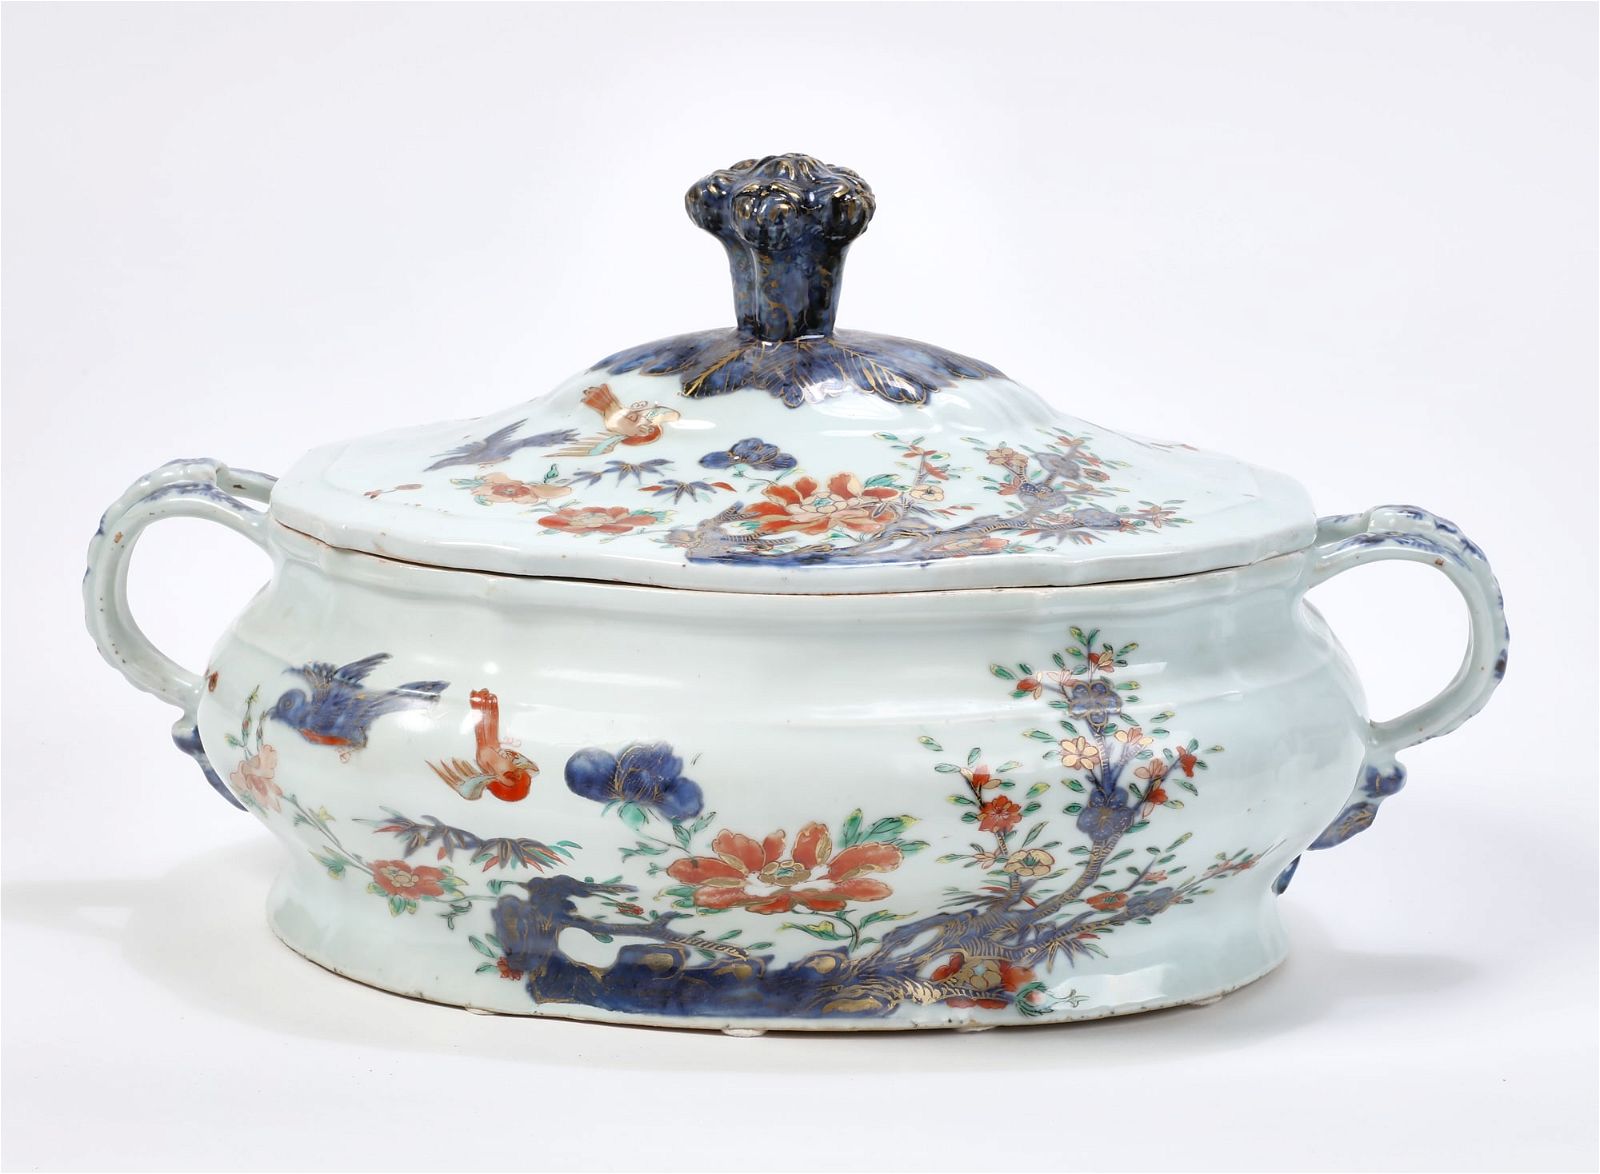 A CHINESE EXPORT PORCELAIN TOBACCO LEAF